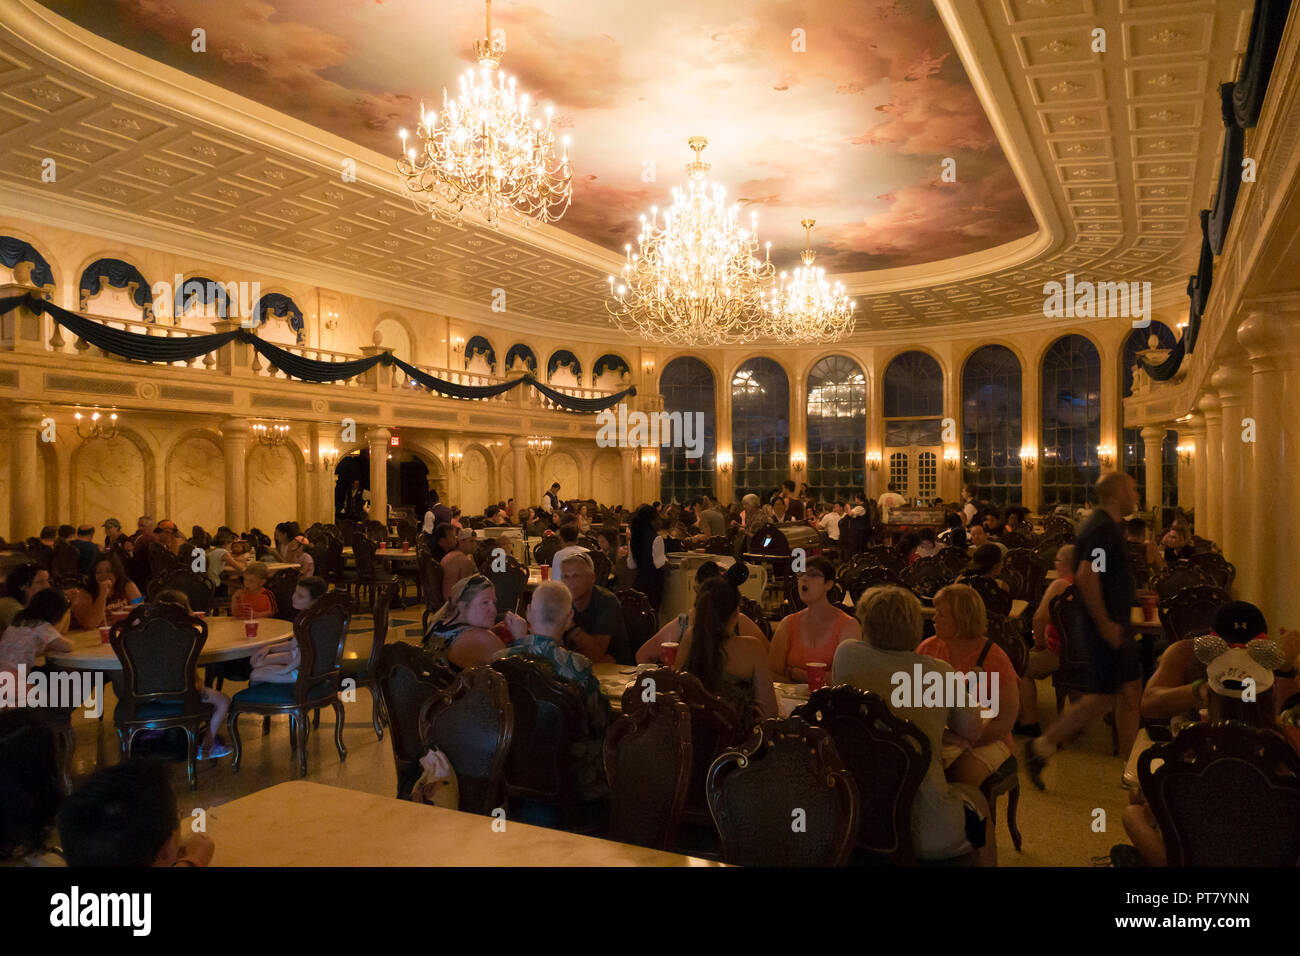 Be Our Guest Restaurant High Resolution Stock Photography And Images Alamy